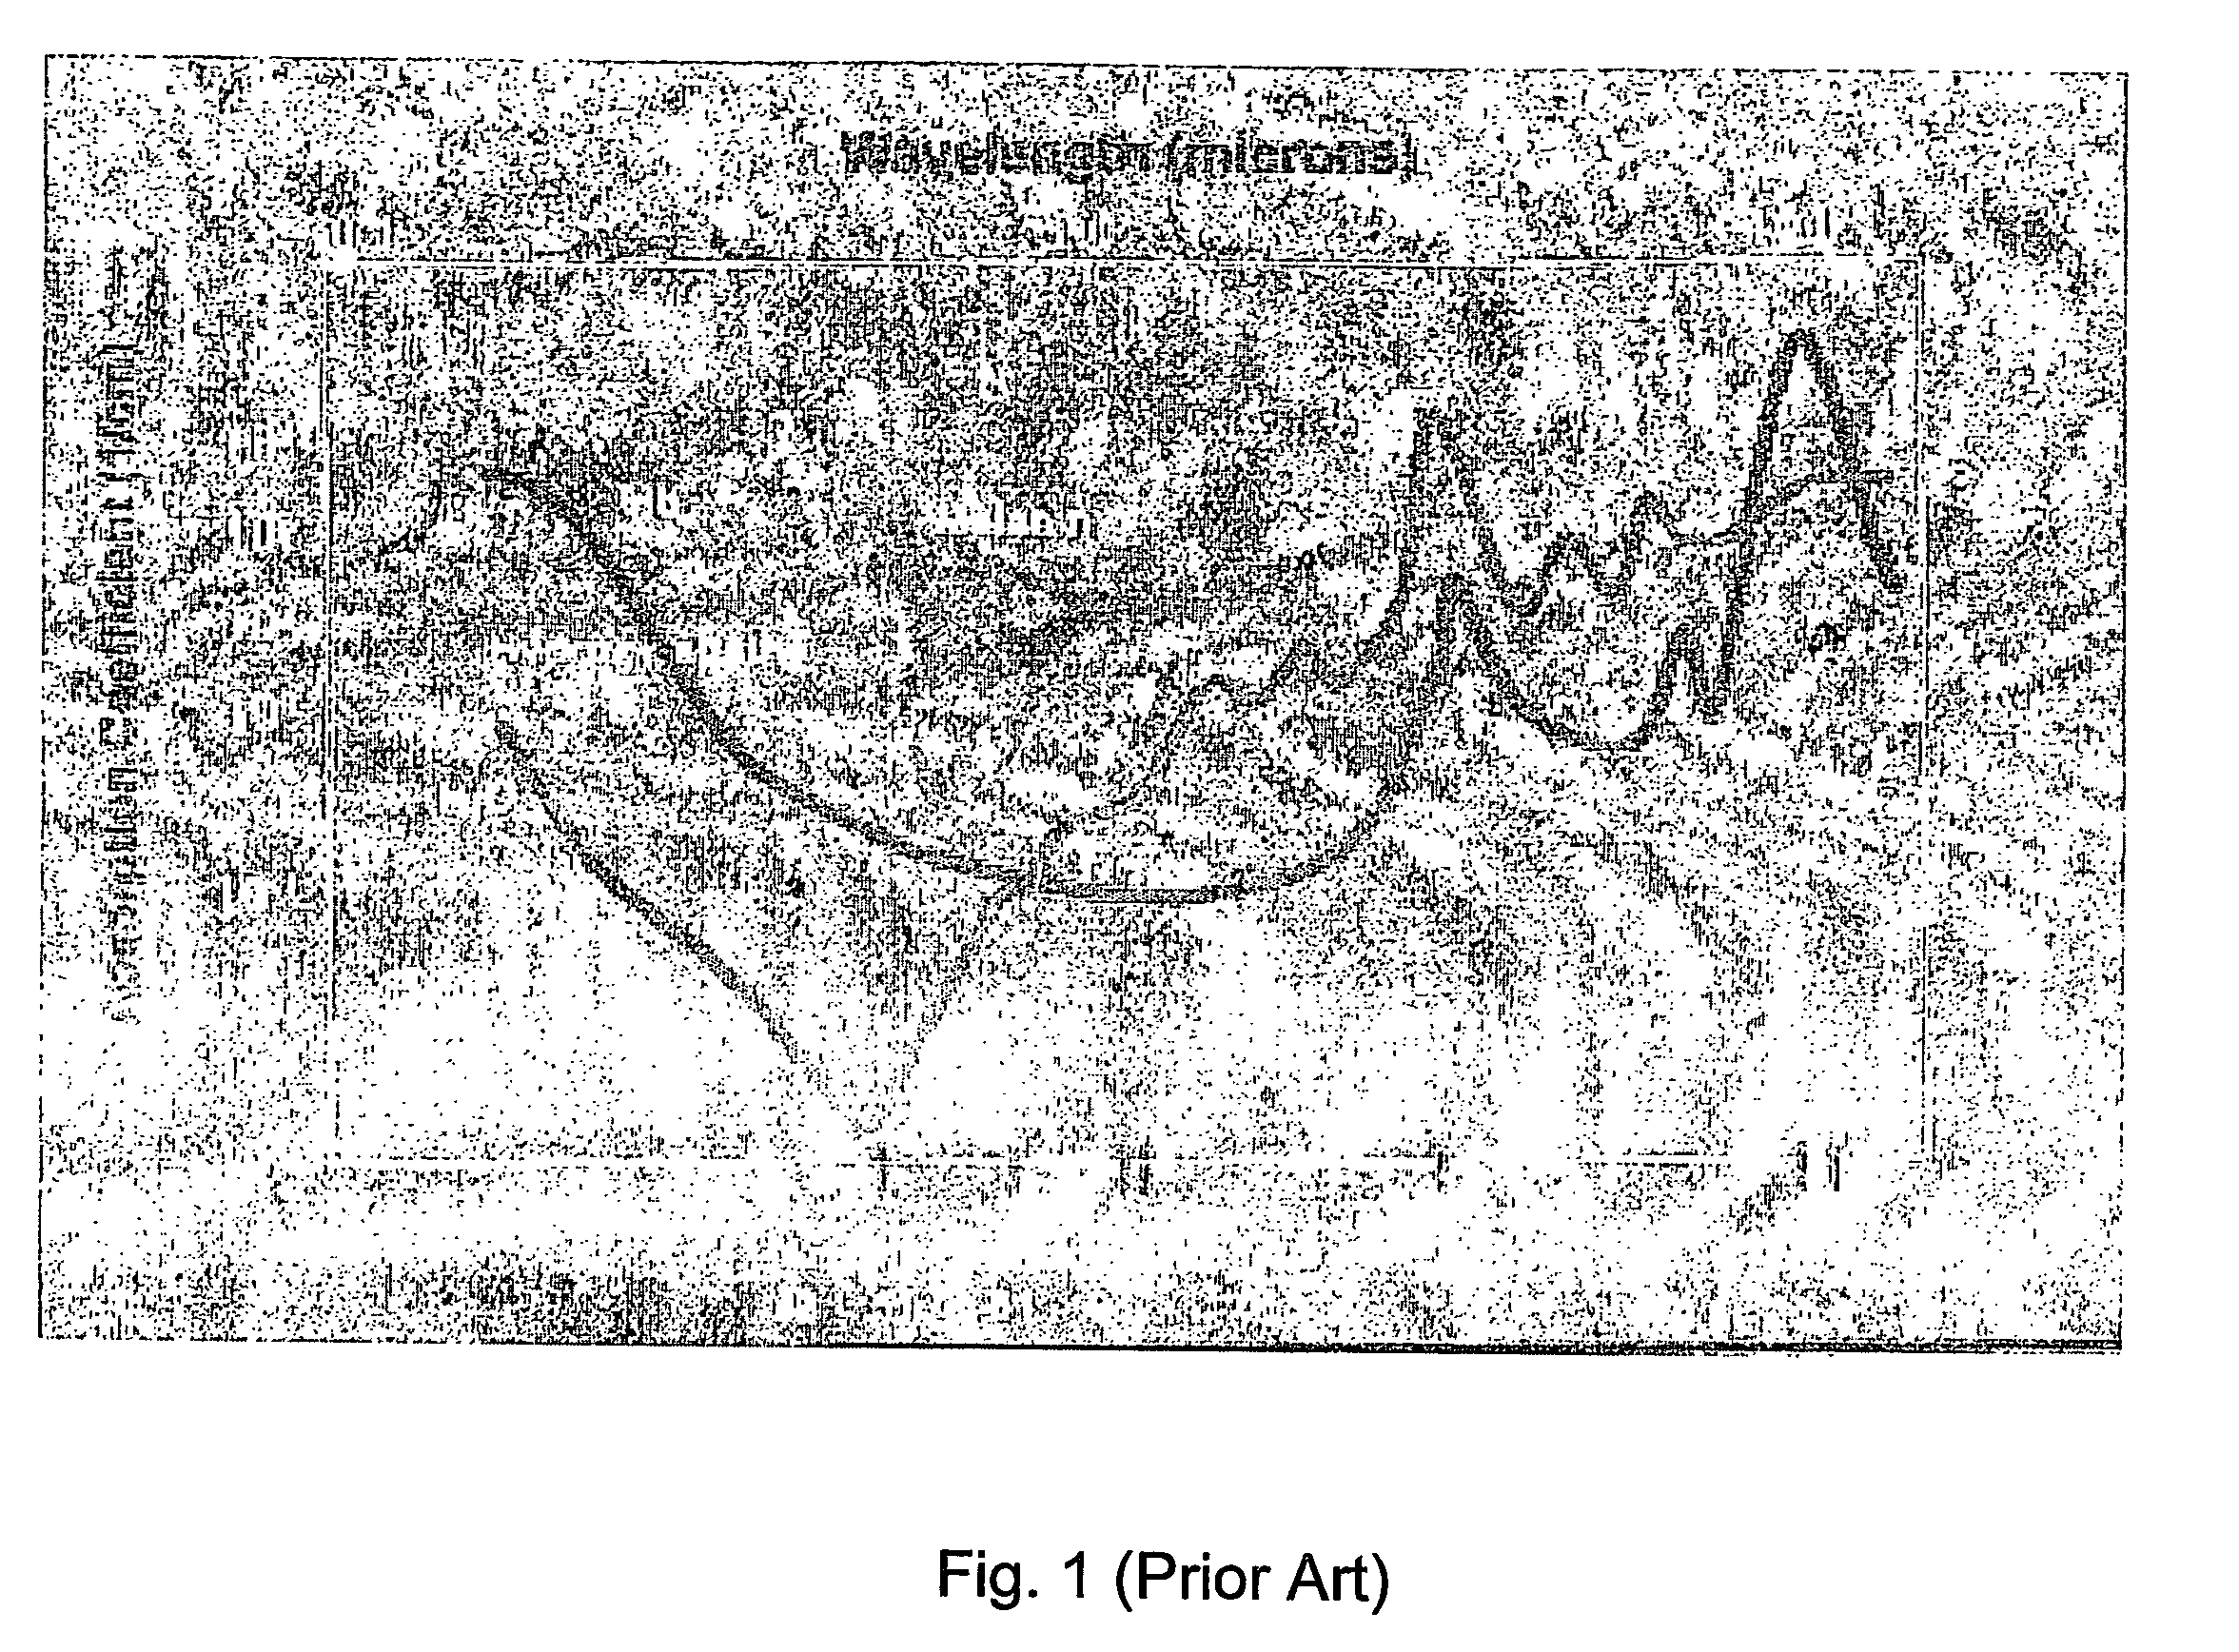 System,apparatus and method for large area tissue ablation